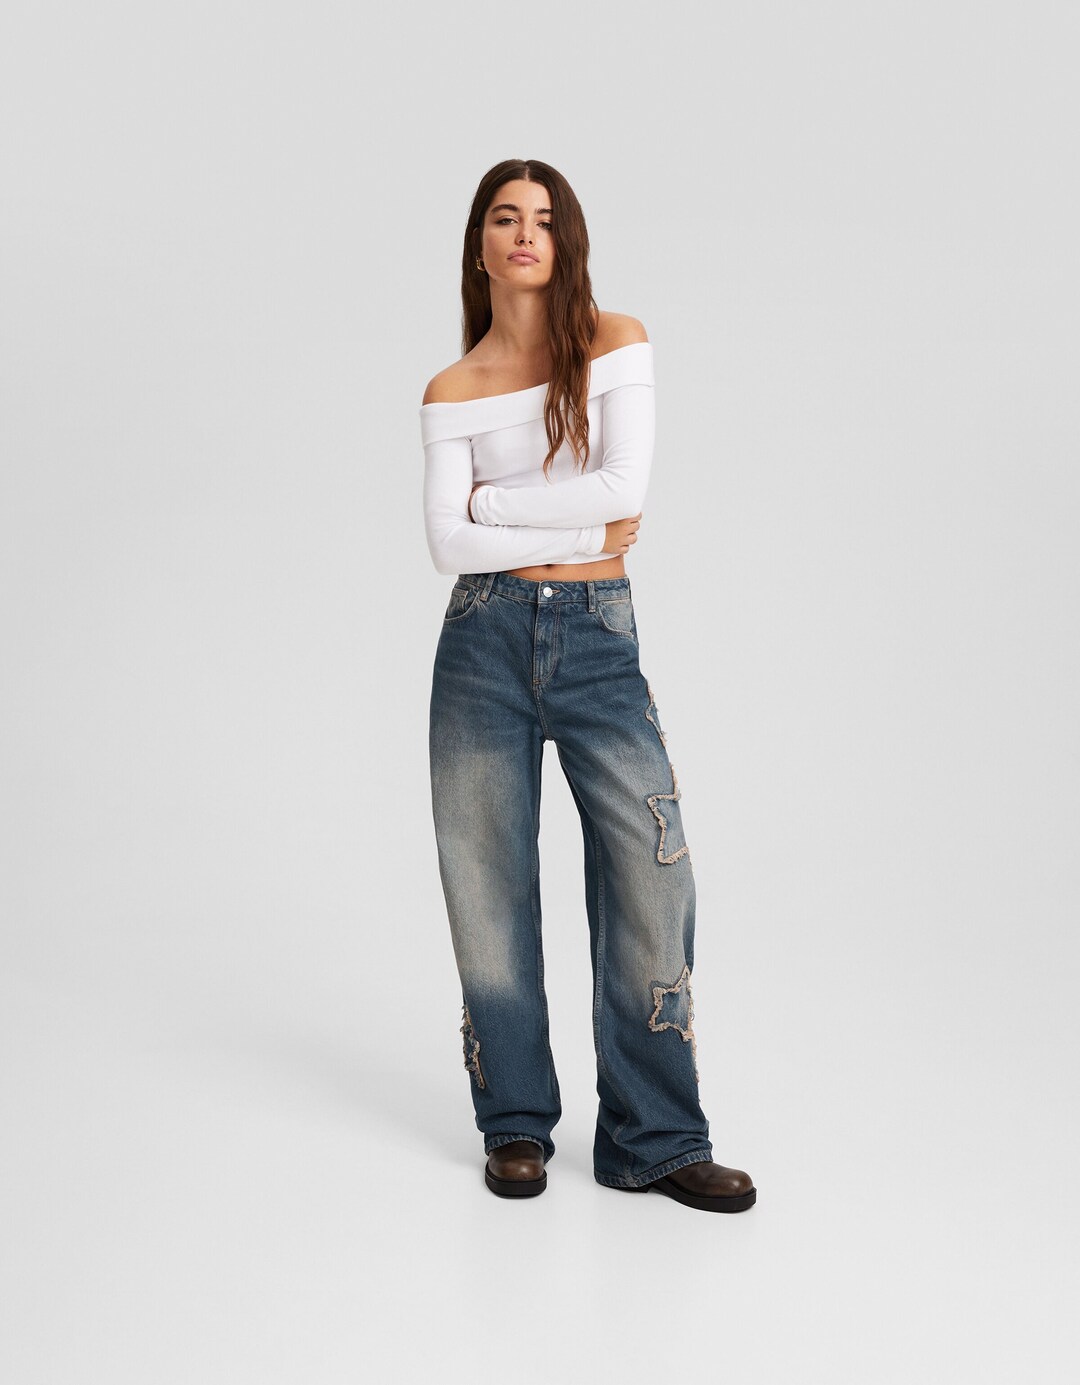 Baggy jeans with patches and star details